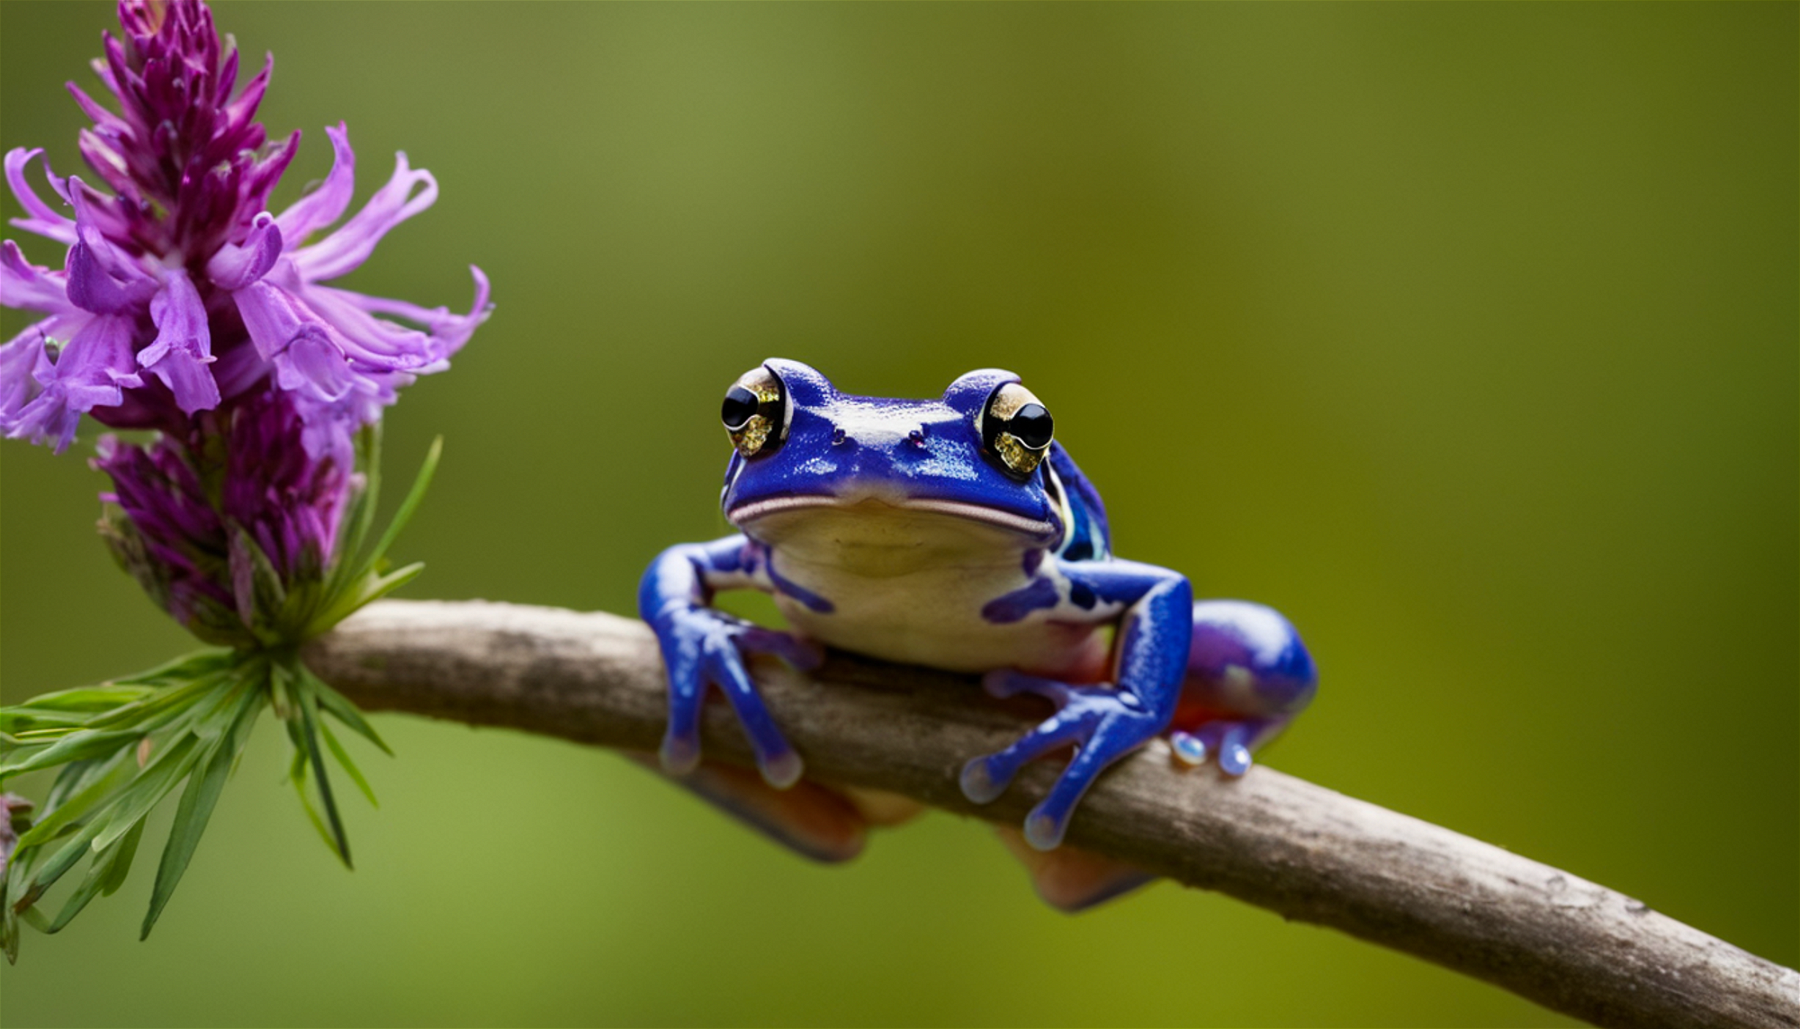 National Geographic photo of a weird and funny looking navy frog on a small branch with Liatris flower